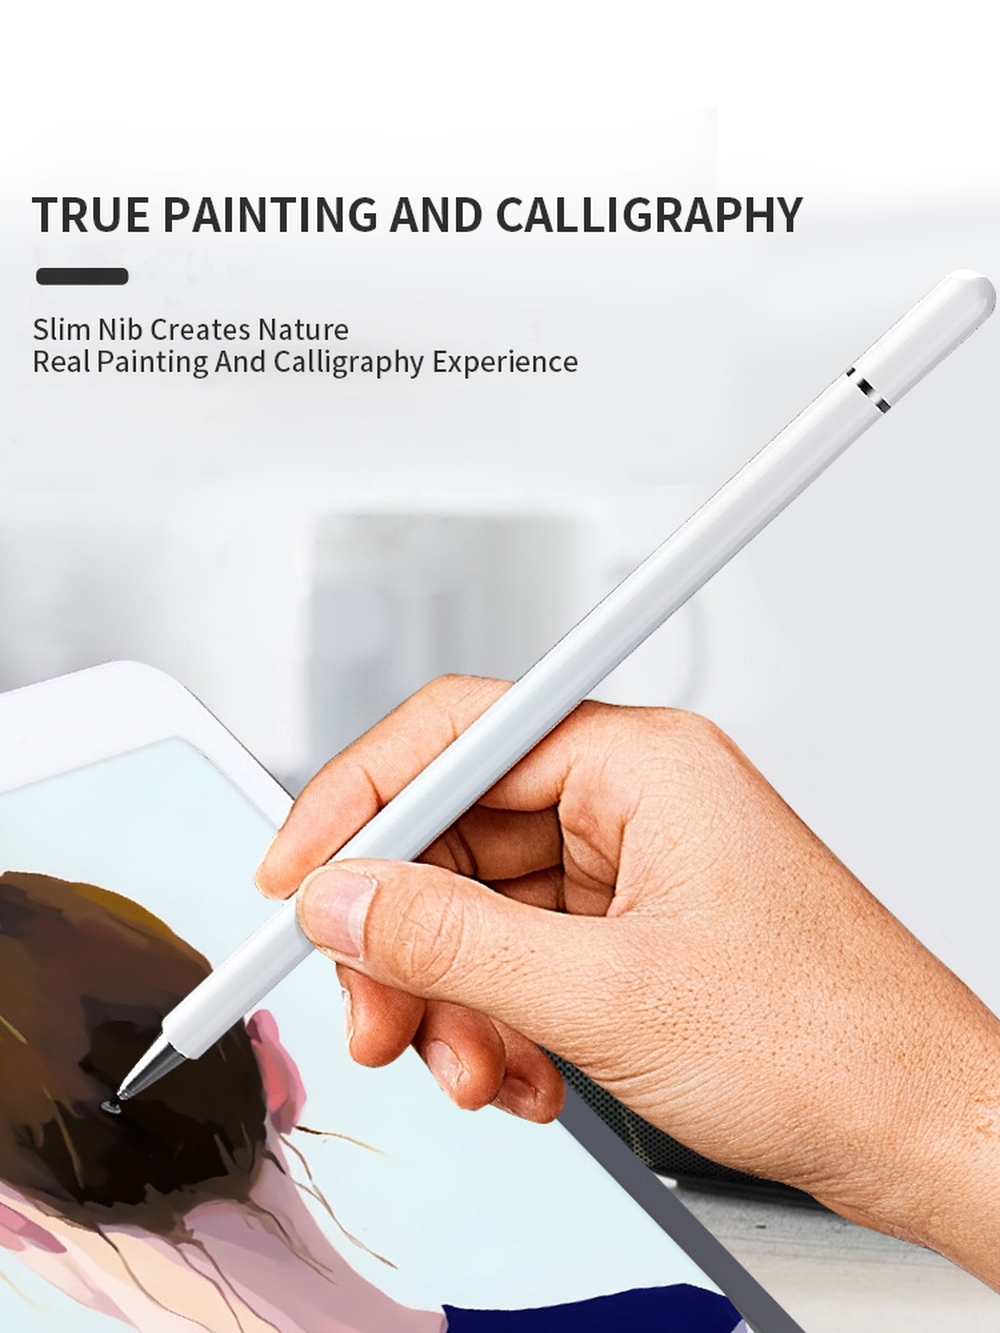 PINZHENG Stylus Touch Pen For Android Drawing Tablet iPhone Mobile Phone Smartphone iPad Touch Screen Universal Capacitive Pen